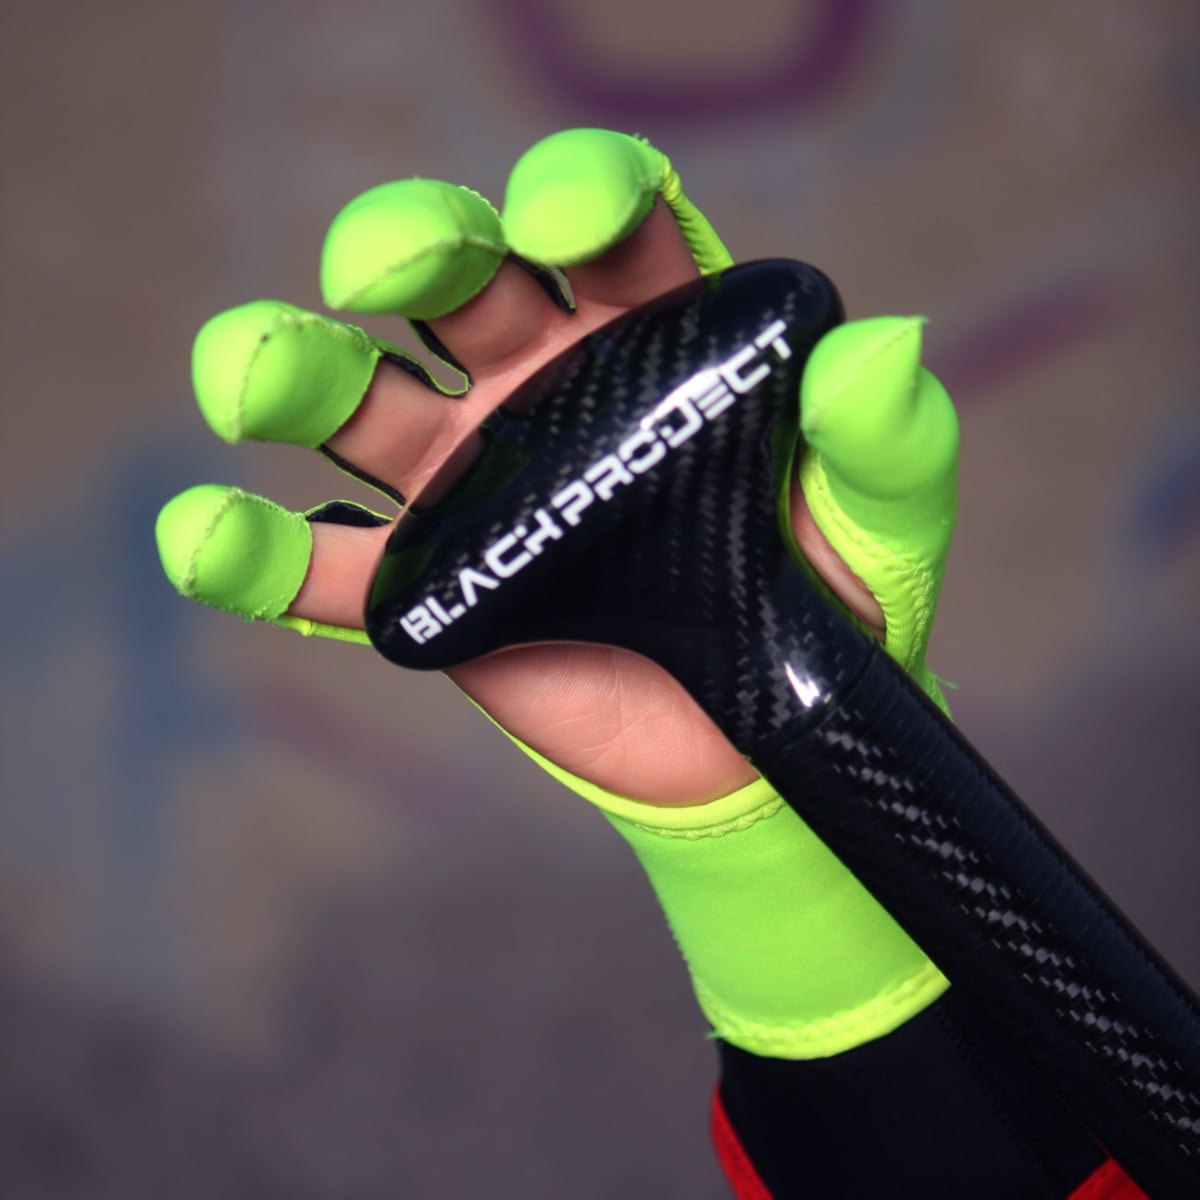 Standout Open Palm Glove with SUP paddle